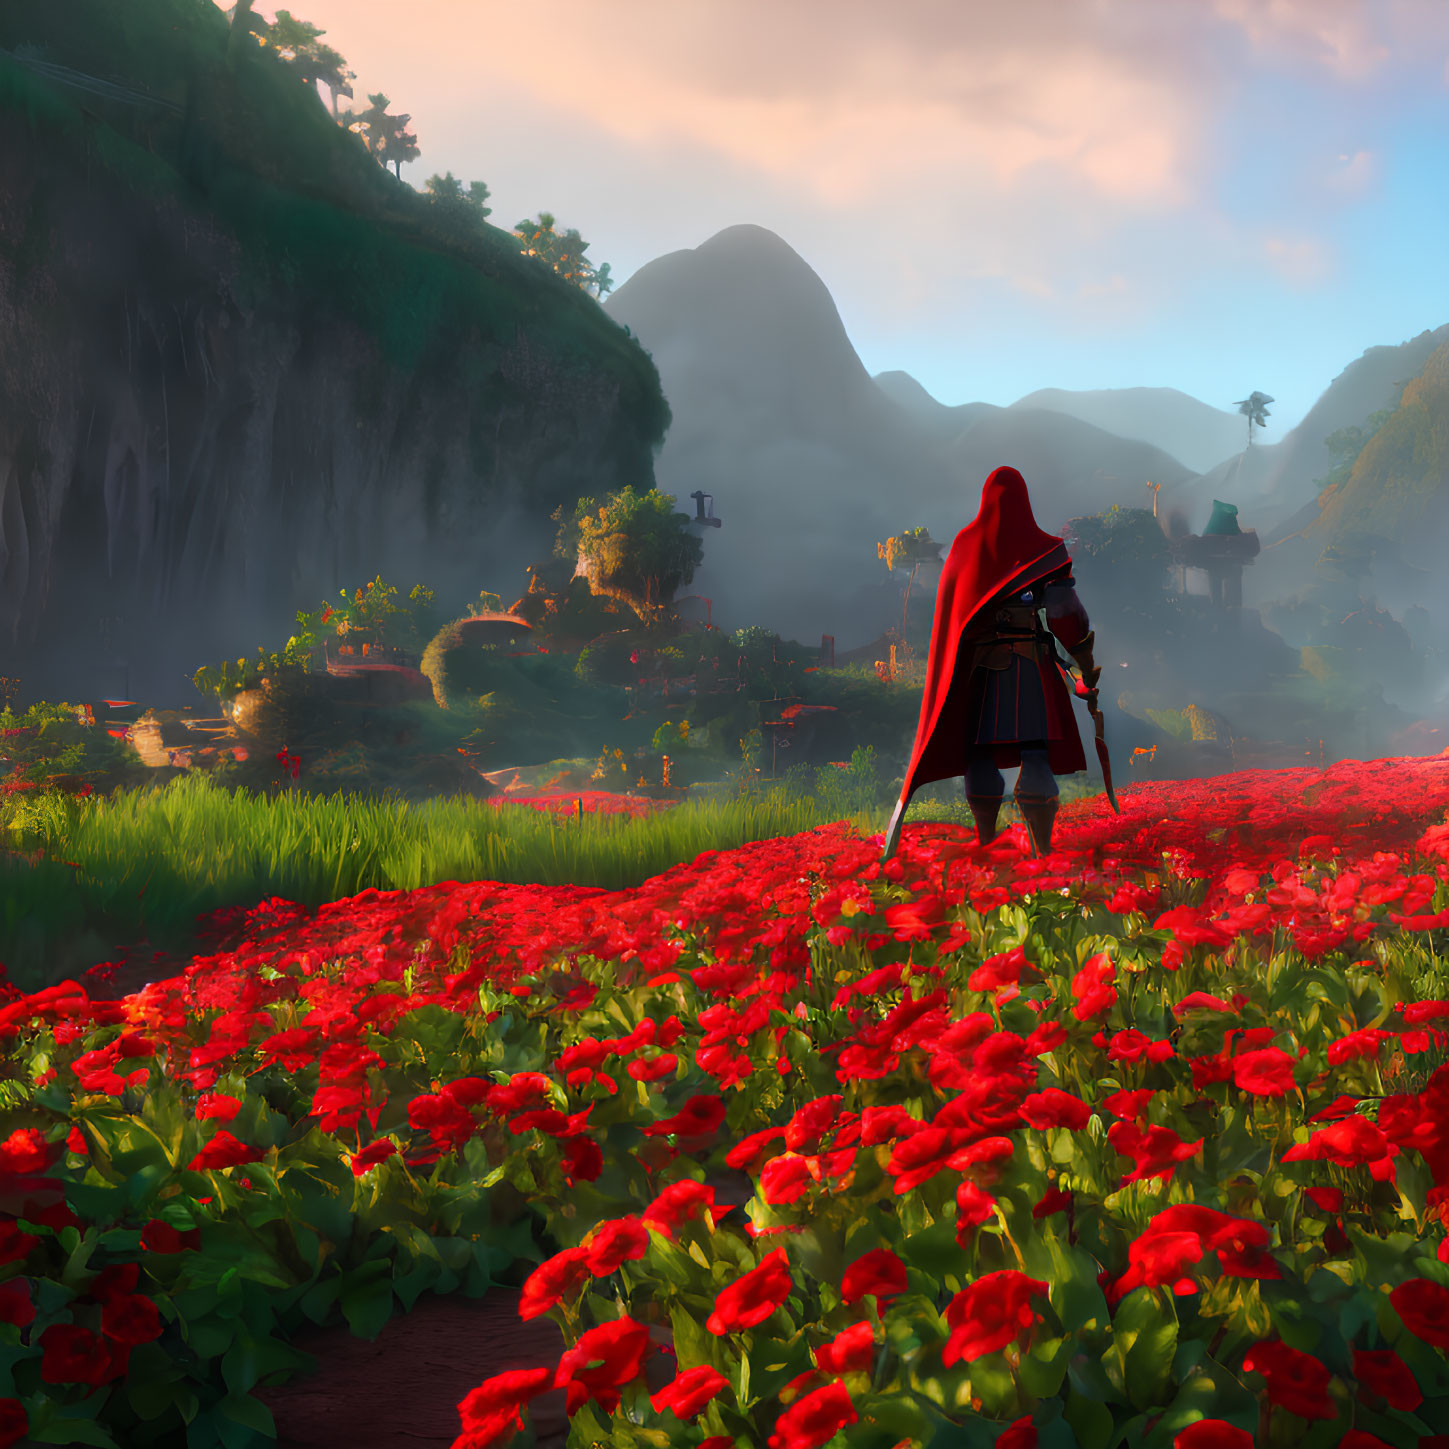 Figure in red cloak stands in vibrant field of red flowers overlooking lush valley, waterfalls, traditional structures